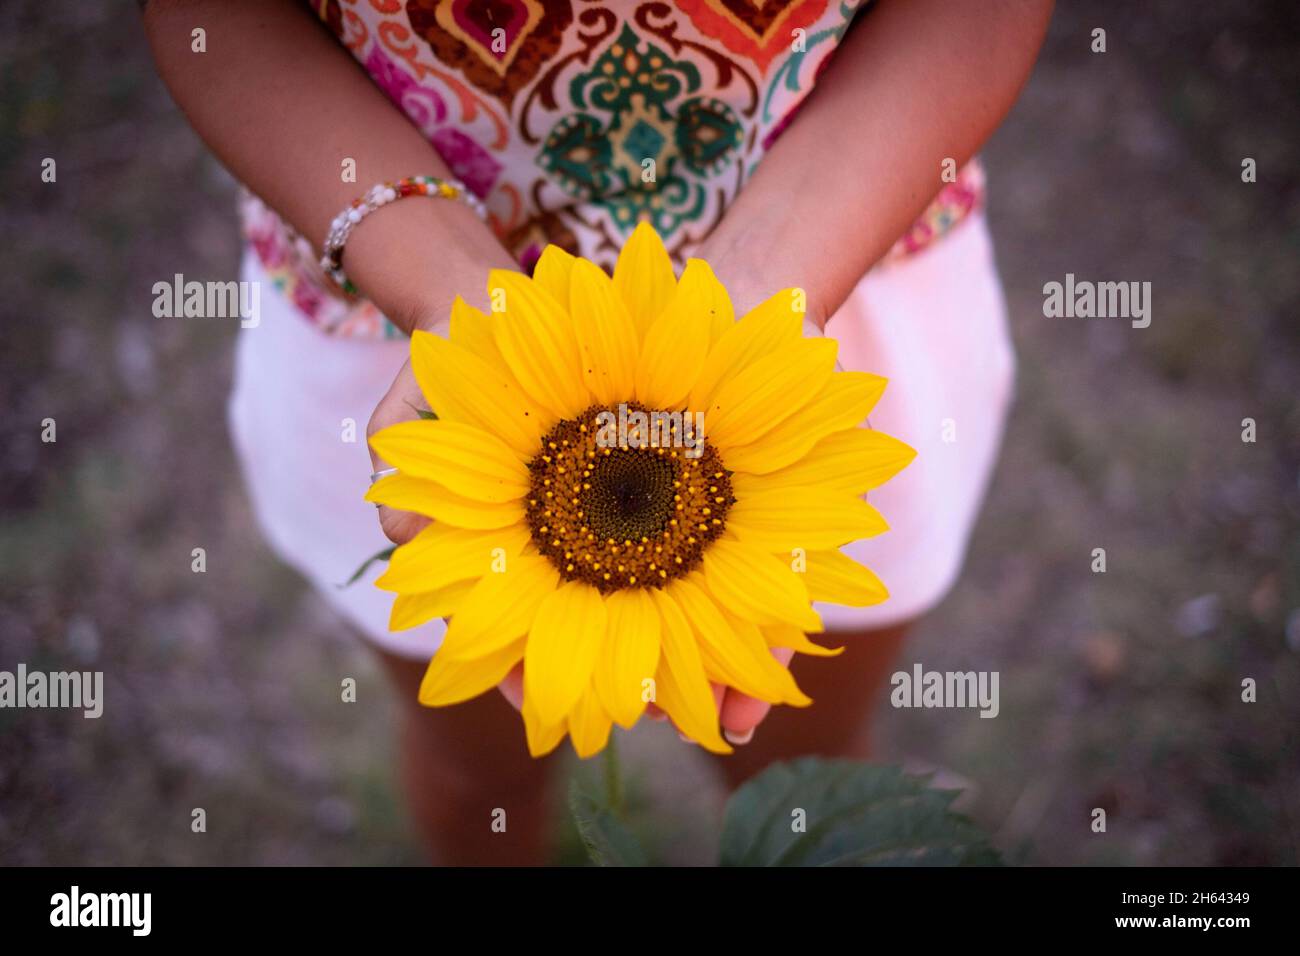 top view of hands of woman traveler holding beautiful freshly bloomed yellow sunflower. Stock Photo